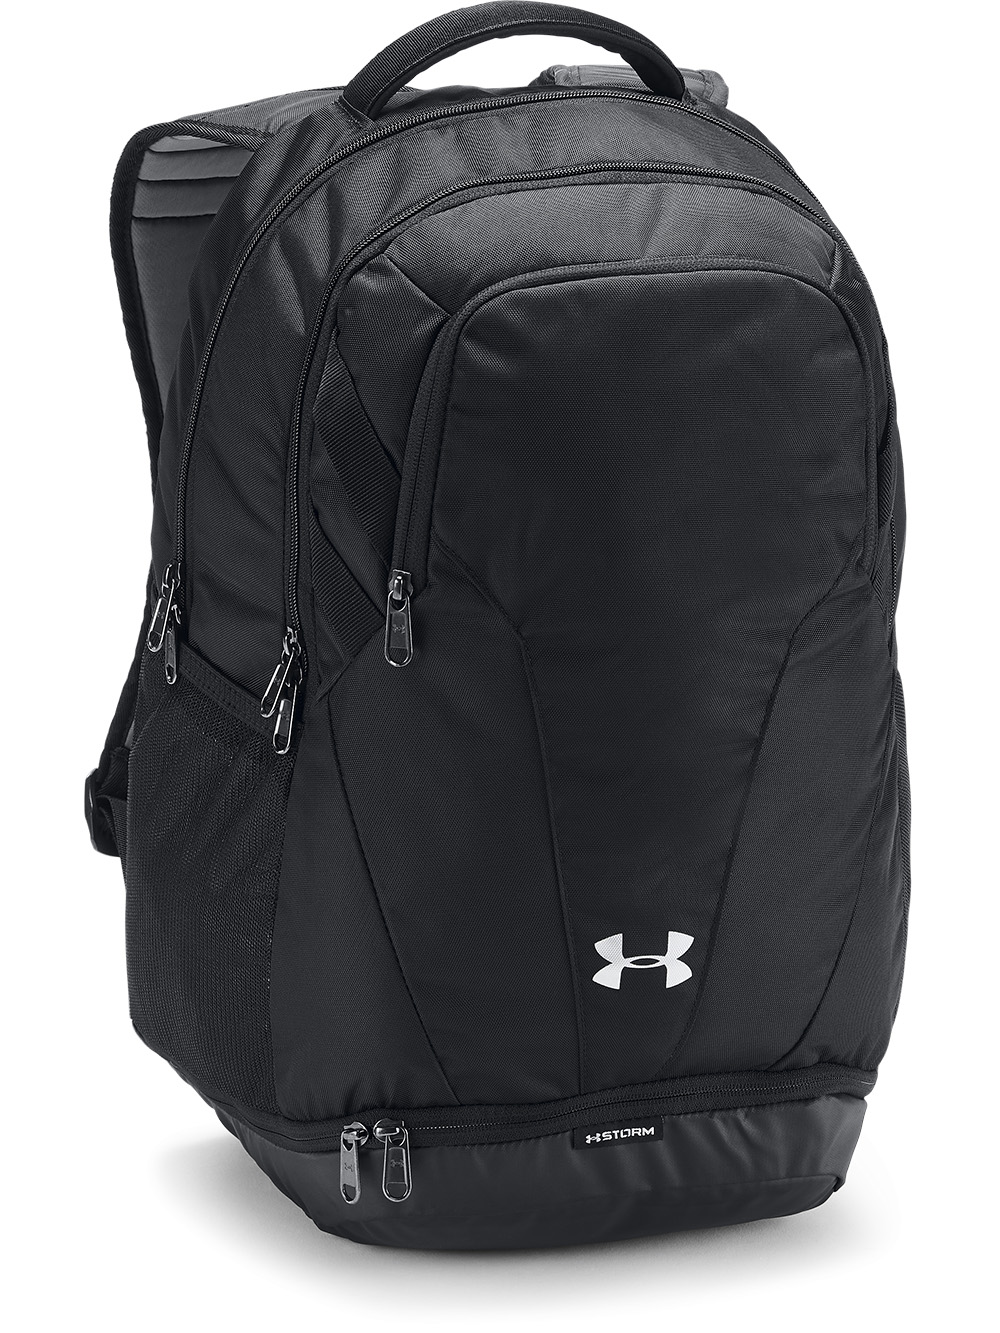 under armour volleyball backpack